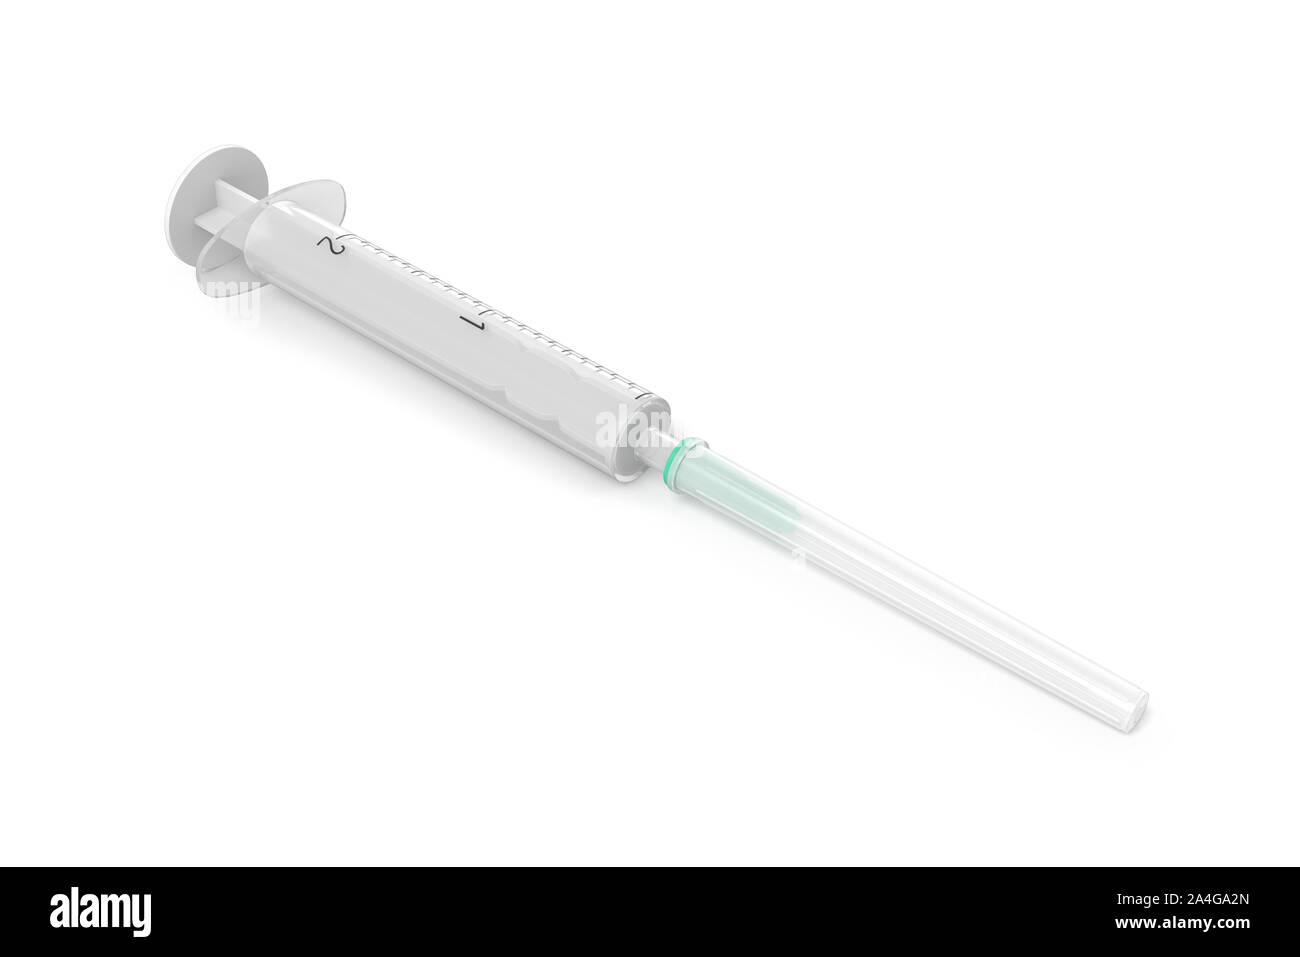 3d rendering of safety medical syringe with needle isolated on white background. Medicine and health. Healthcare industry. Medical instruments and equ Stock Photo